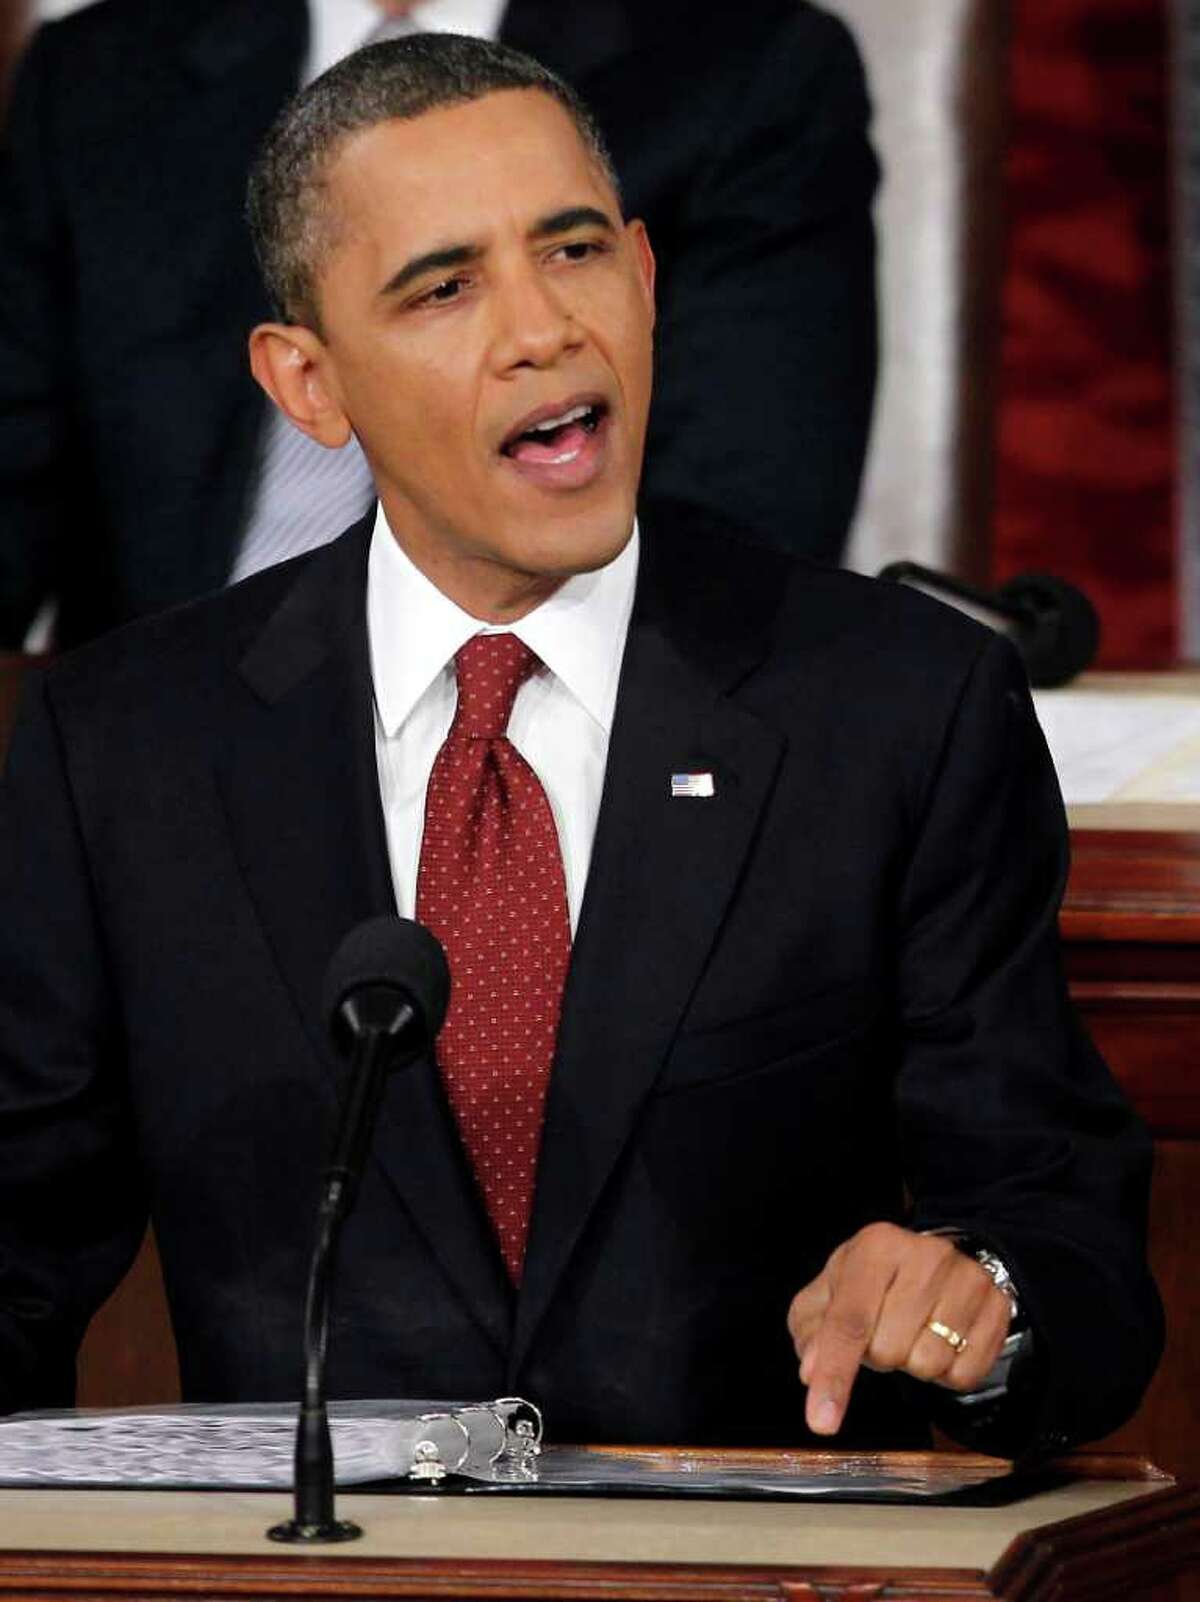 President Barack Obama delivers his State of the Union address on Capitol Hill in Washington, Tuesday, Jan. 24, 2012. (AP Photo/Pablo Martinez Monsivais)